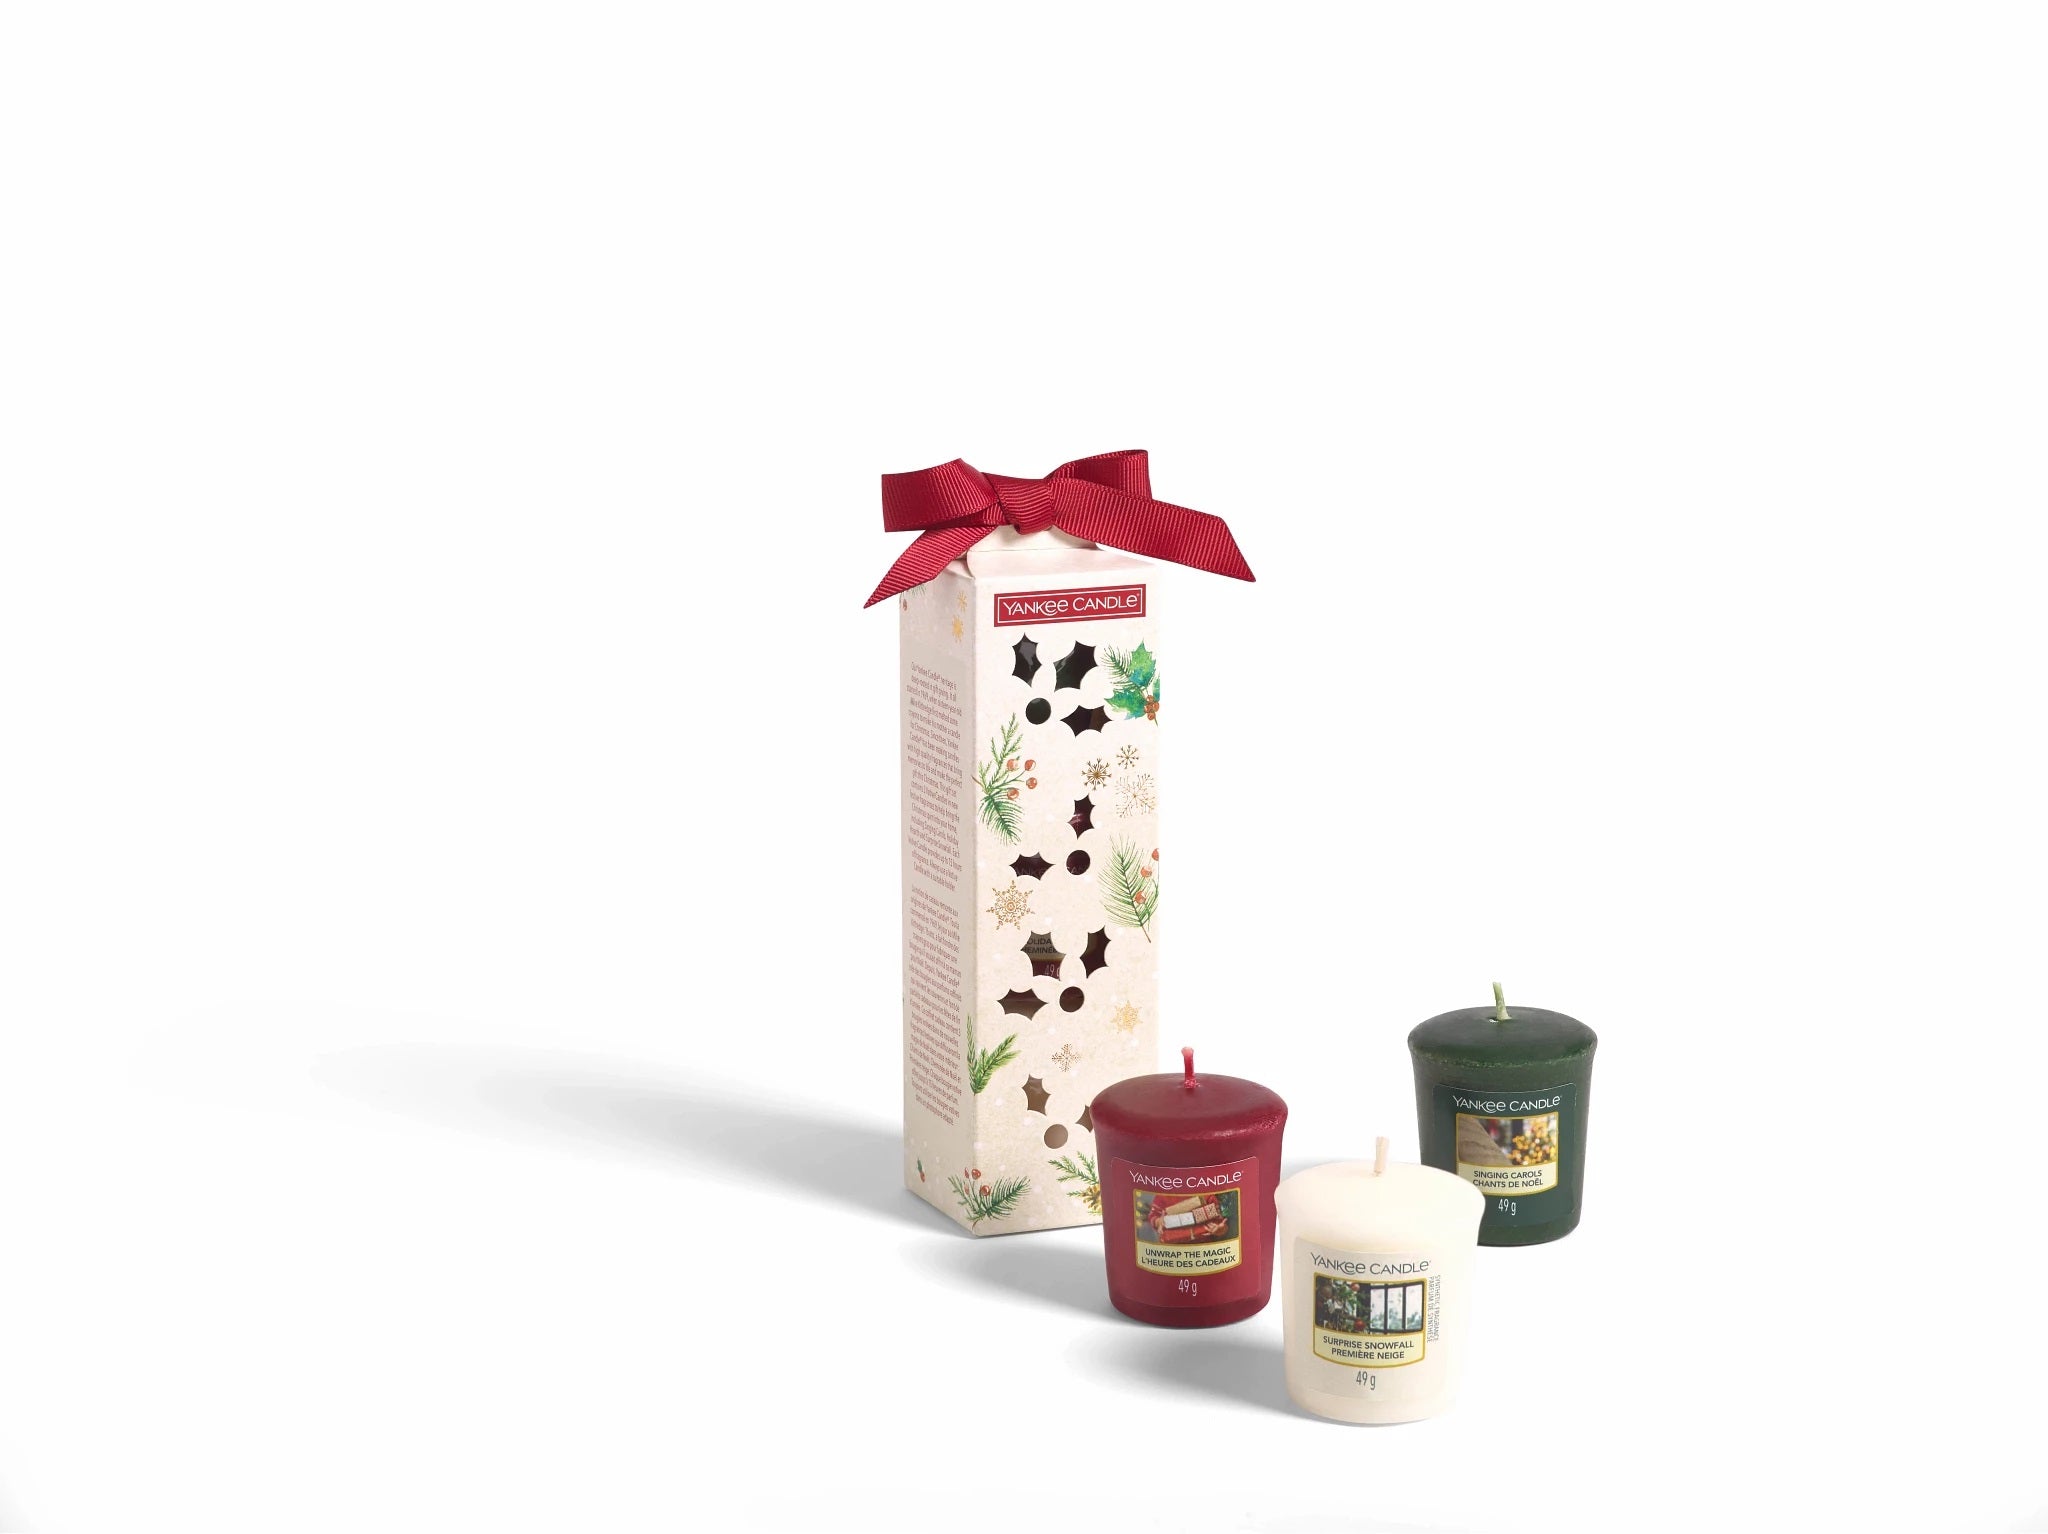 SET 3 CANDELE SAMPLER -Yankee Candle- Confezione Regalo Magical Christmas Morning